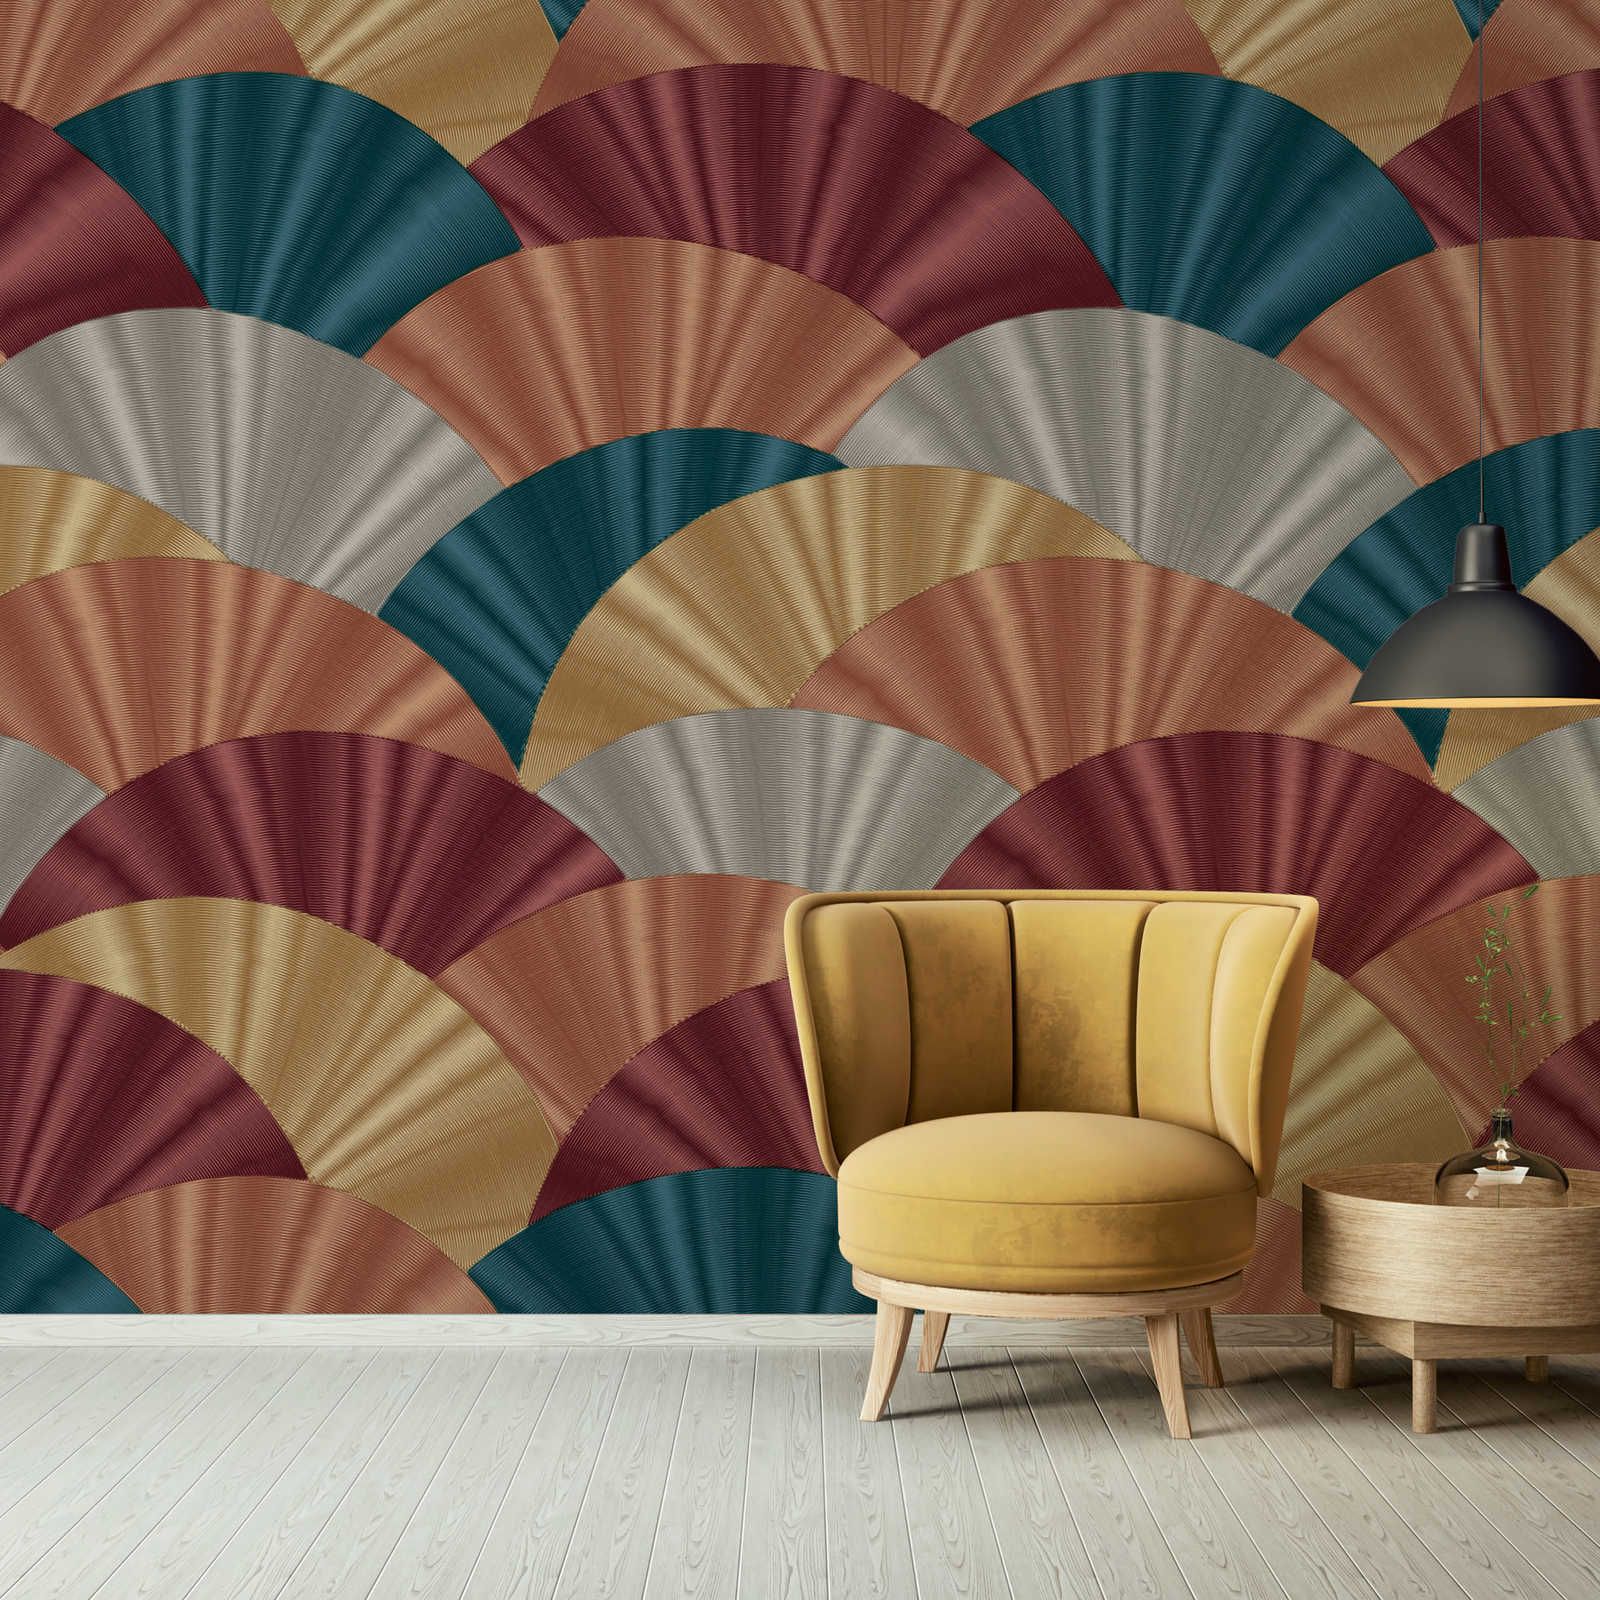 Colourful non-woven wallpaper with large fan pattern - multicoloured, red, turquoise
